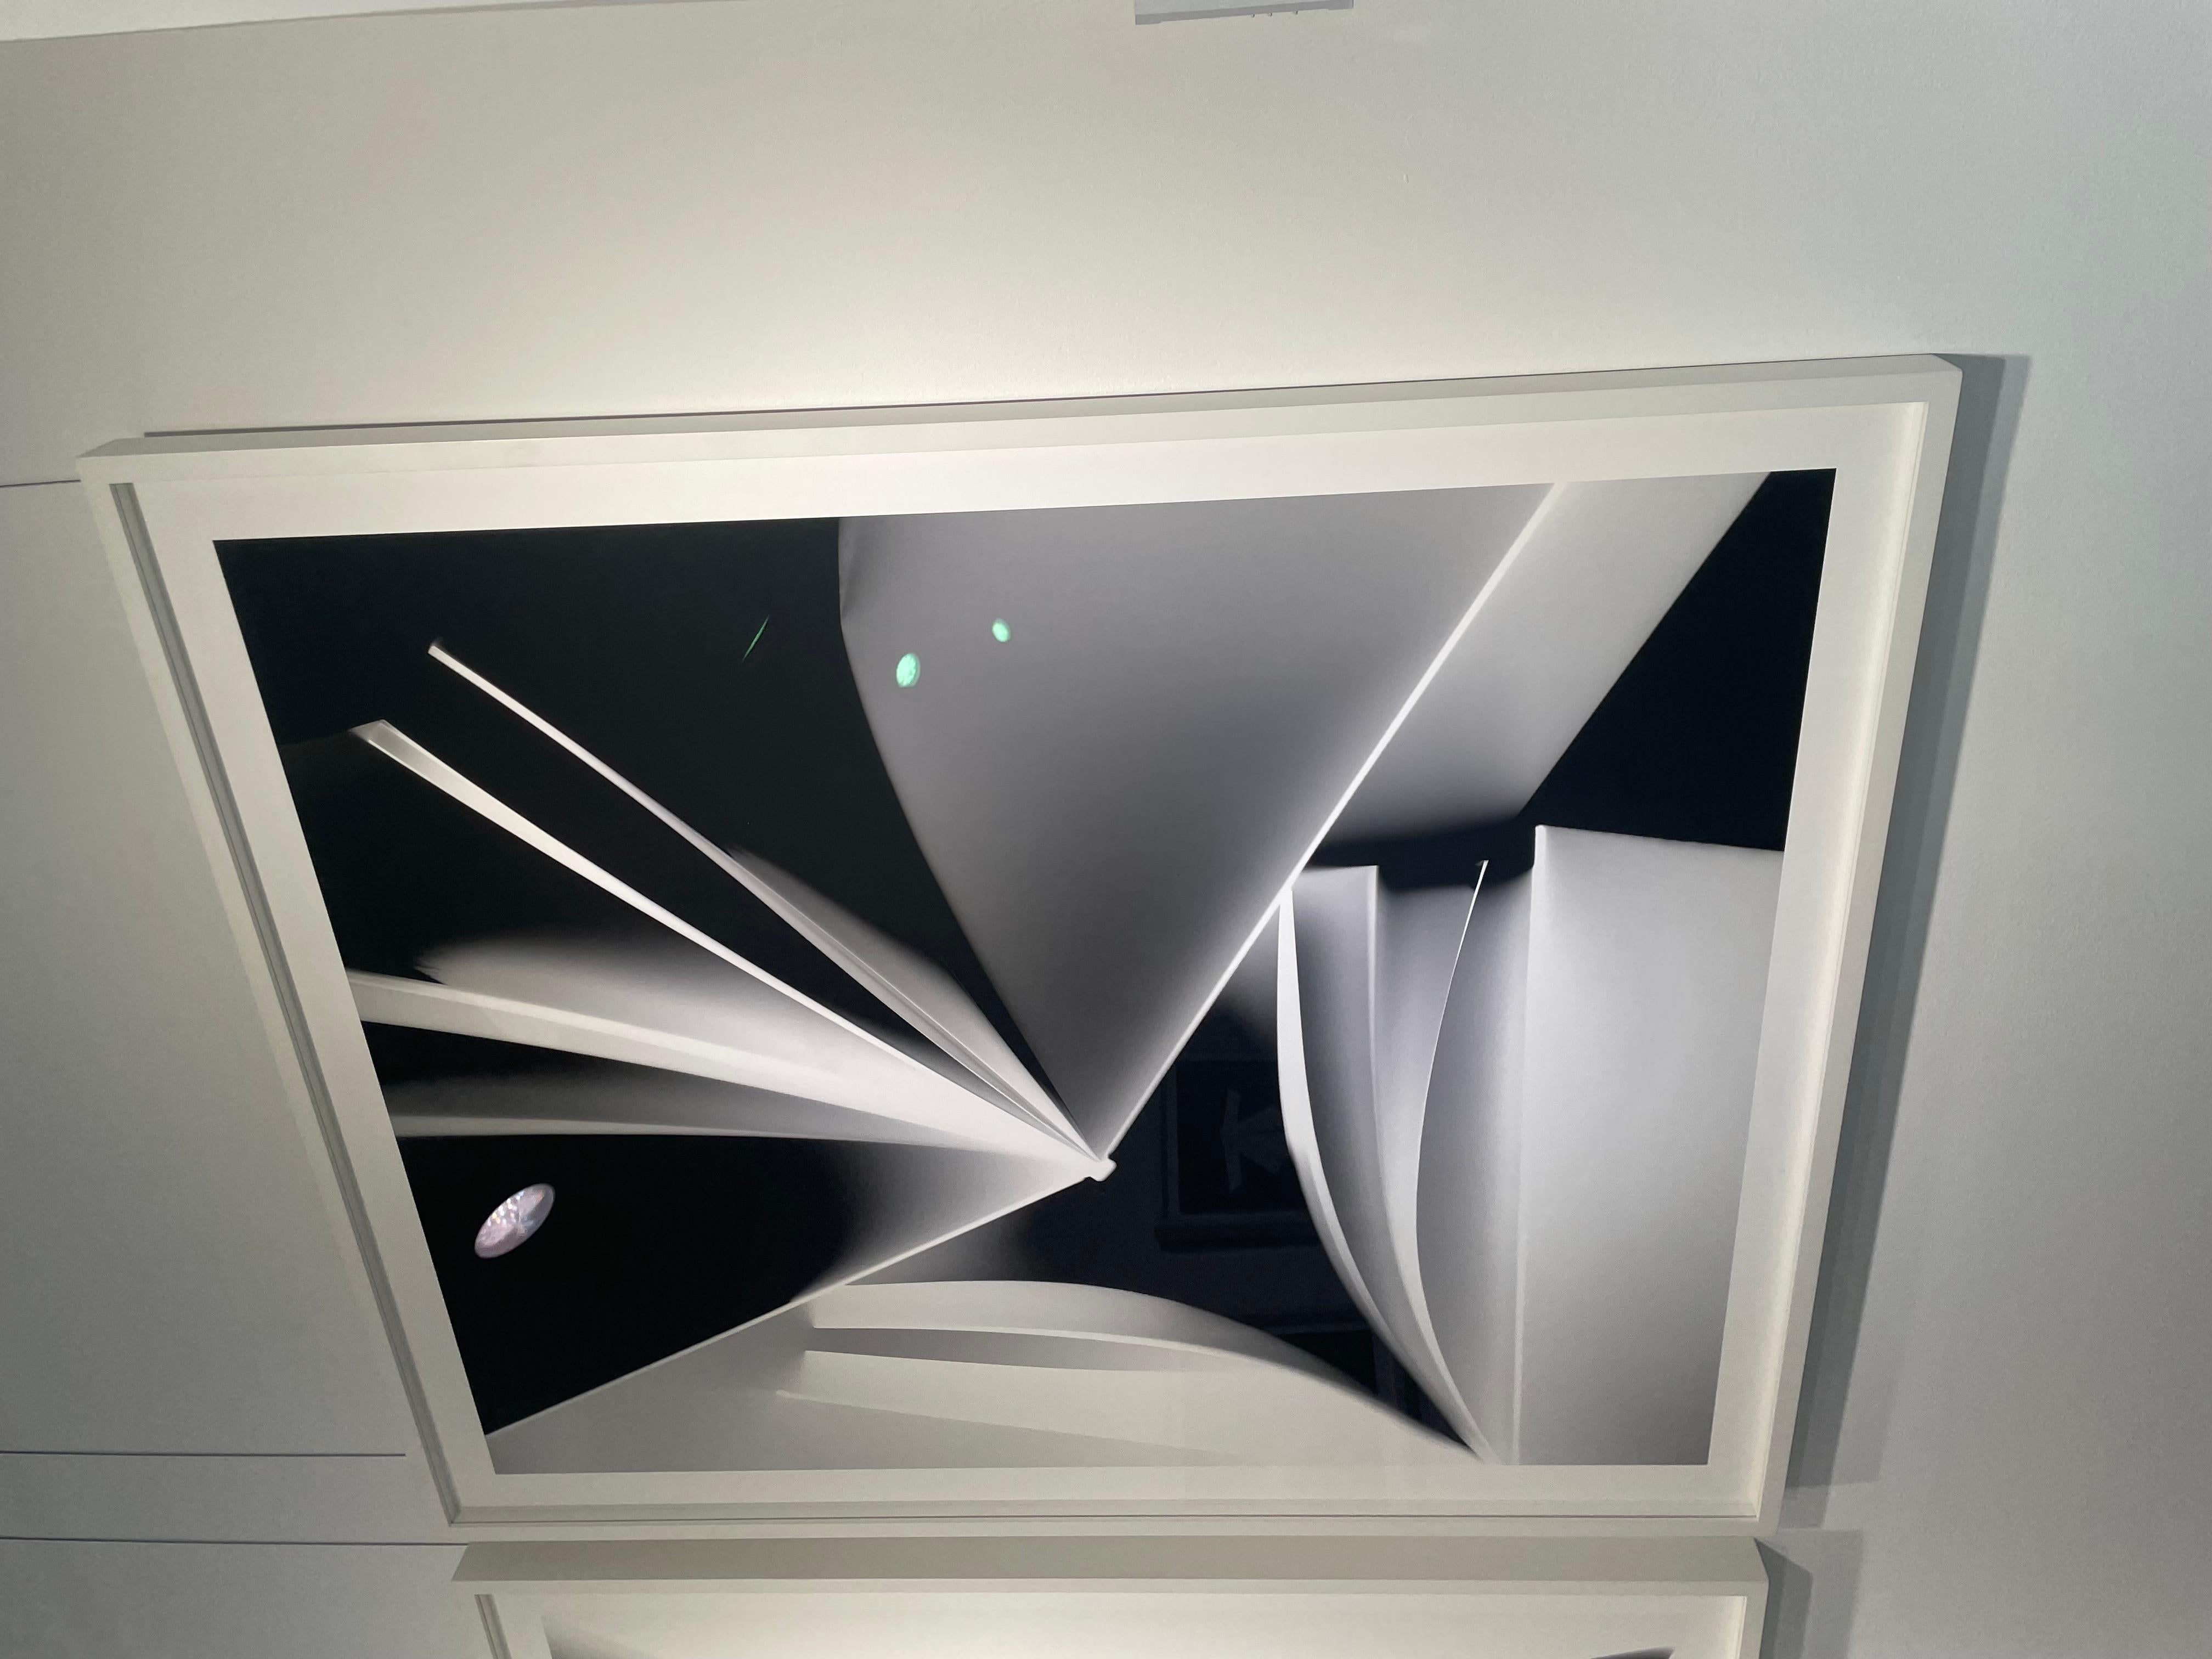 PHOTOGRAMS LITERARY UNITITLED 54 - Contemporary Photograph by Wendy Paton